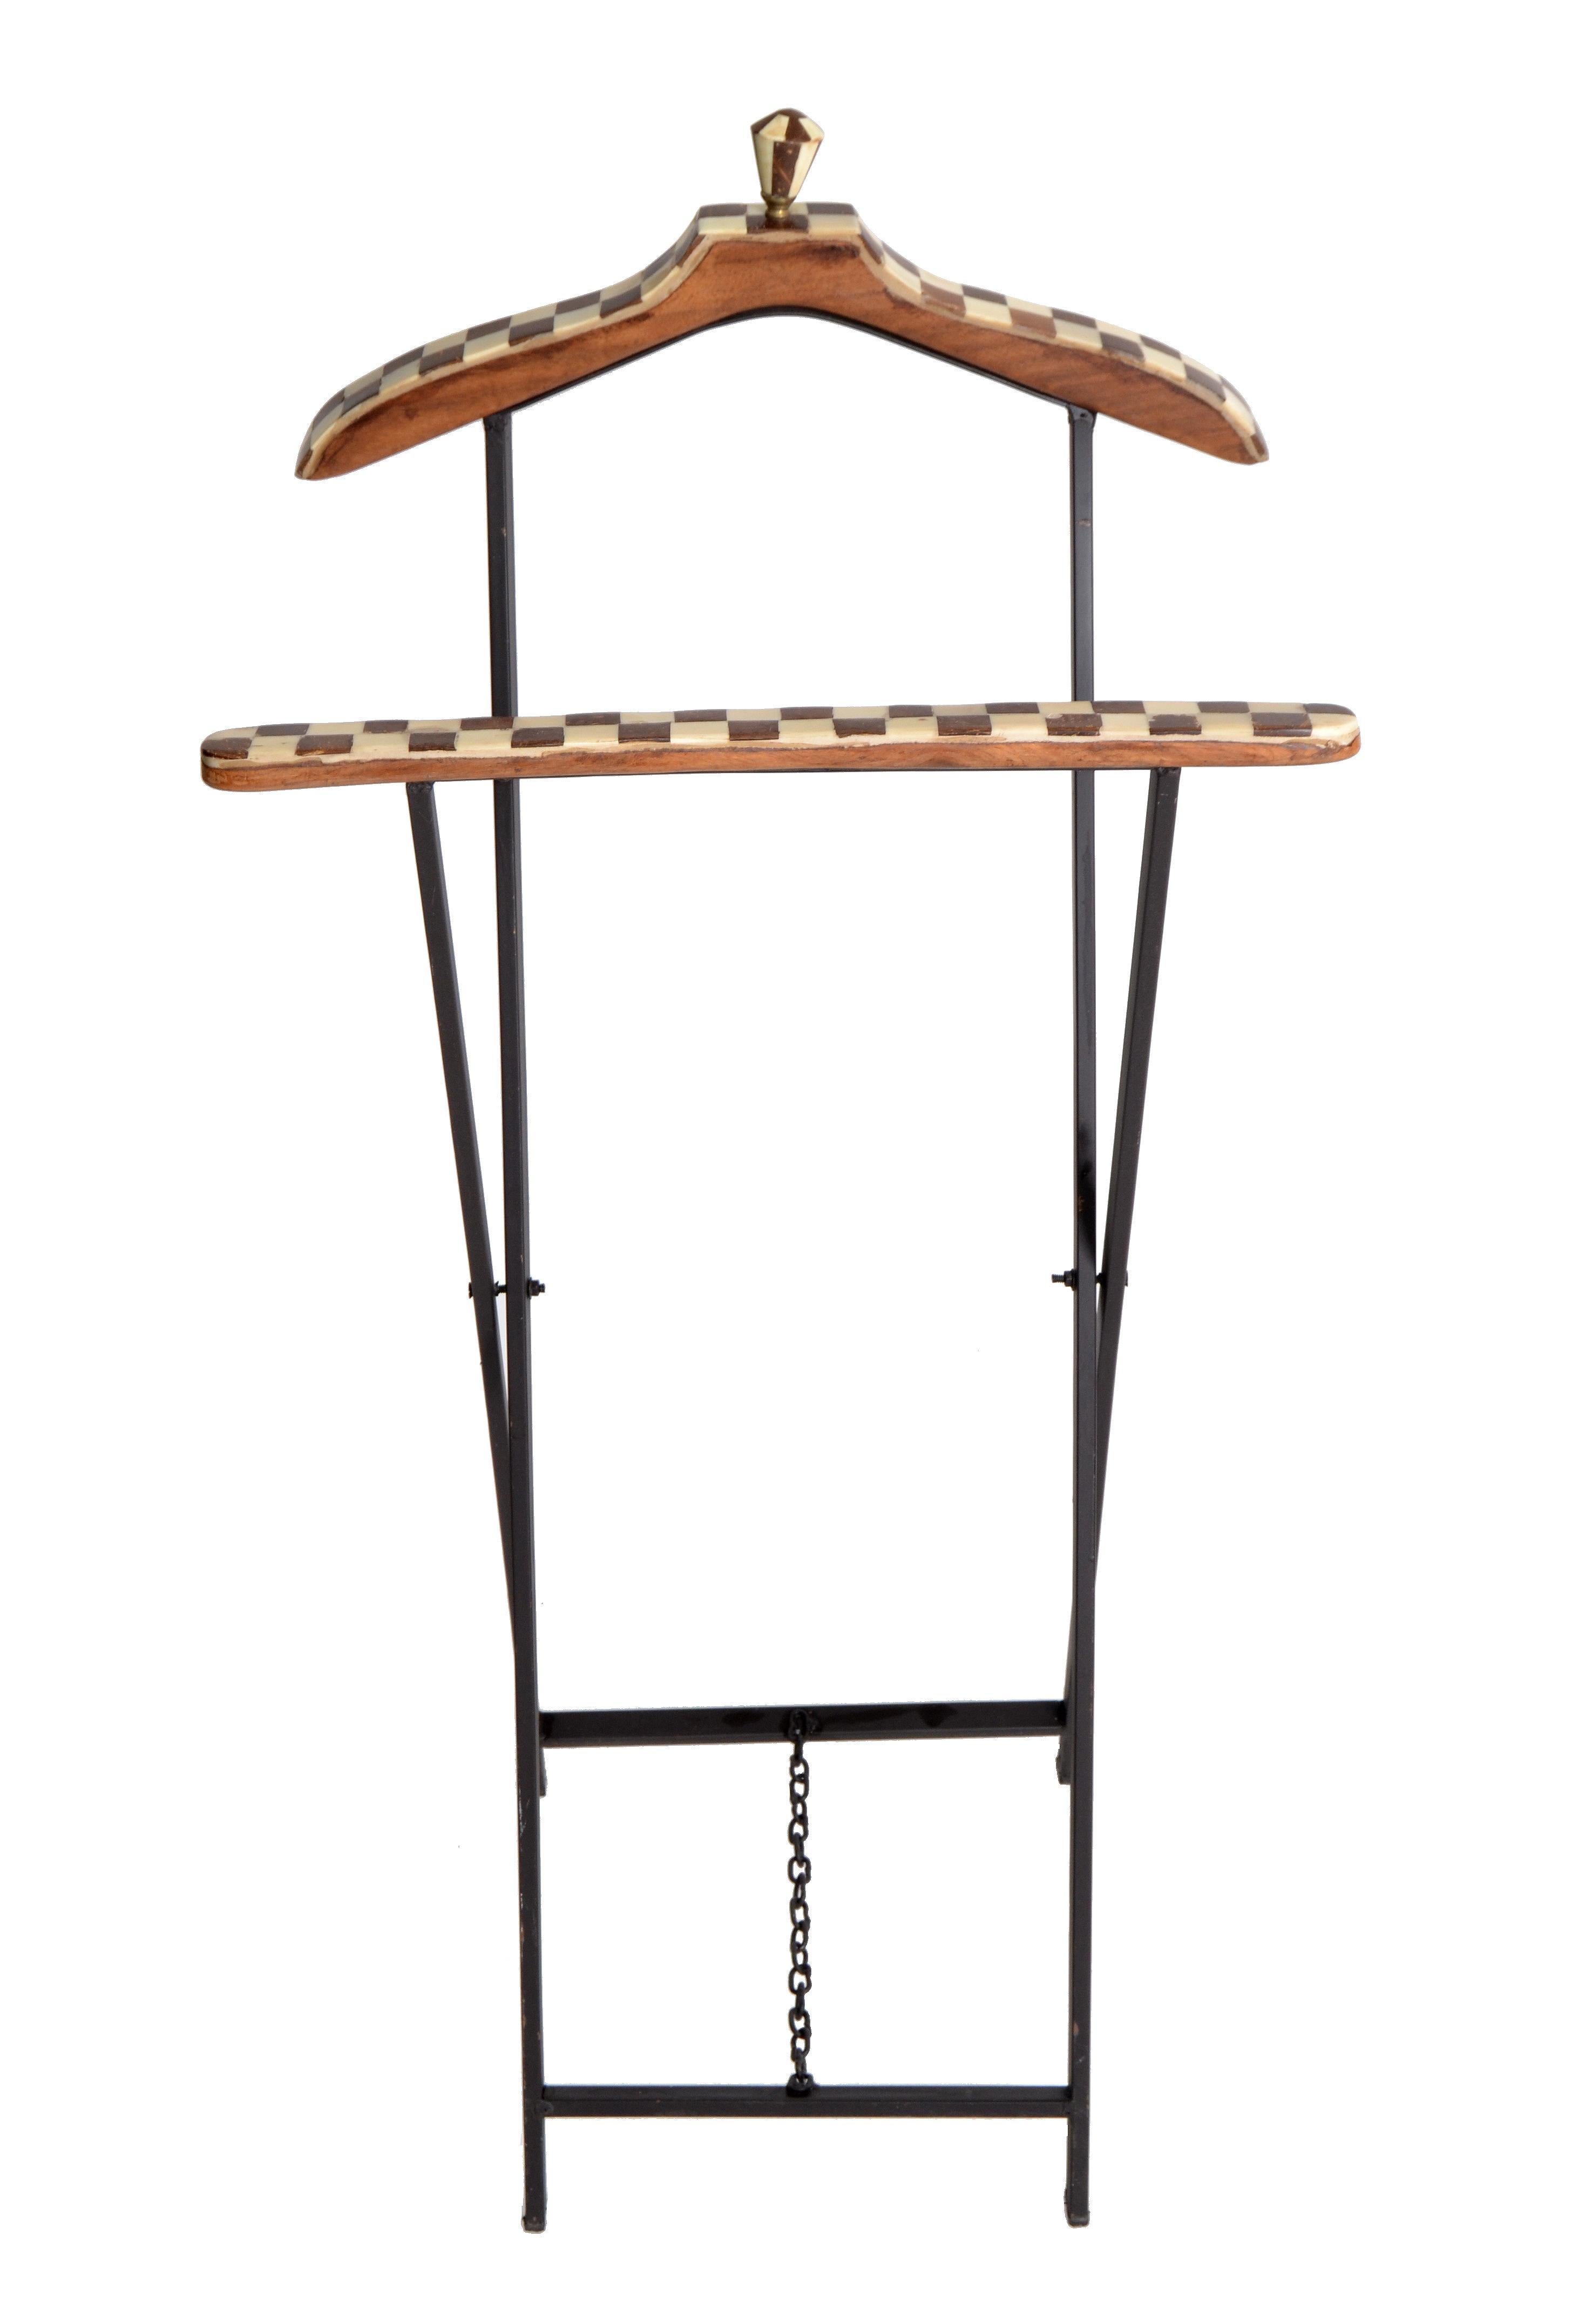 Mid-Century Modern French men's valet stand/coat stand handmade out of wood Marquetry, metal and brass hardware.
It is fully collapse-able.
Dimensions folded: 20.0 W × 4.0 D × 42.0 inches H.
 
  